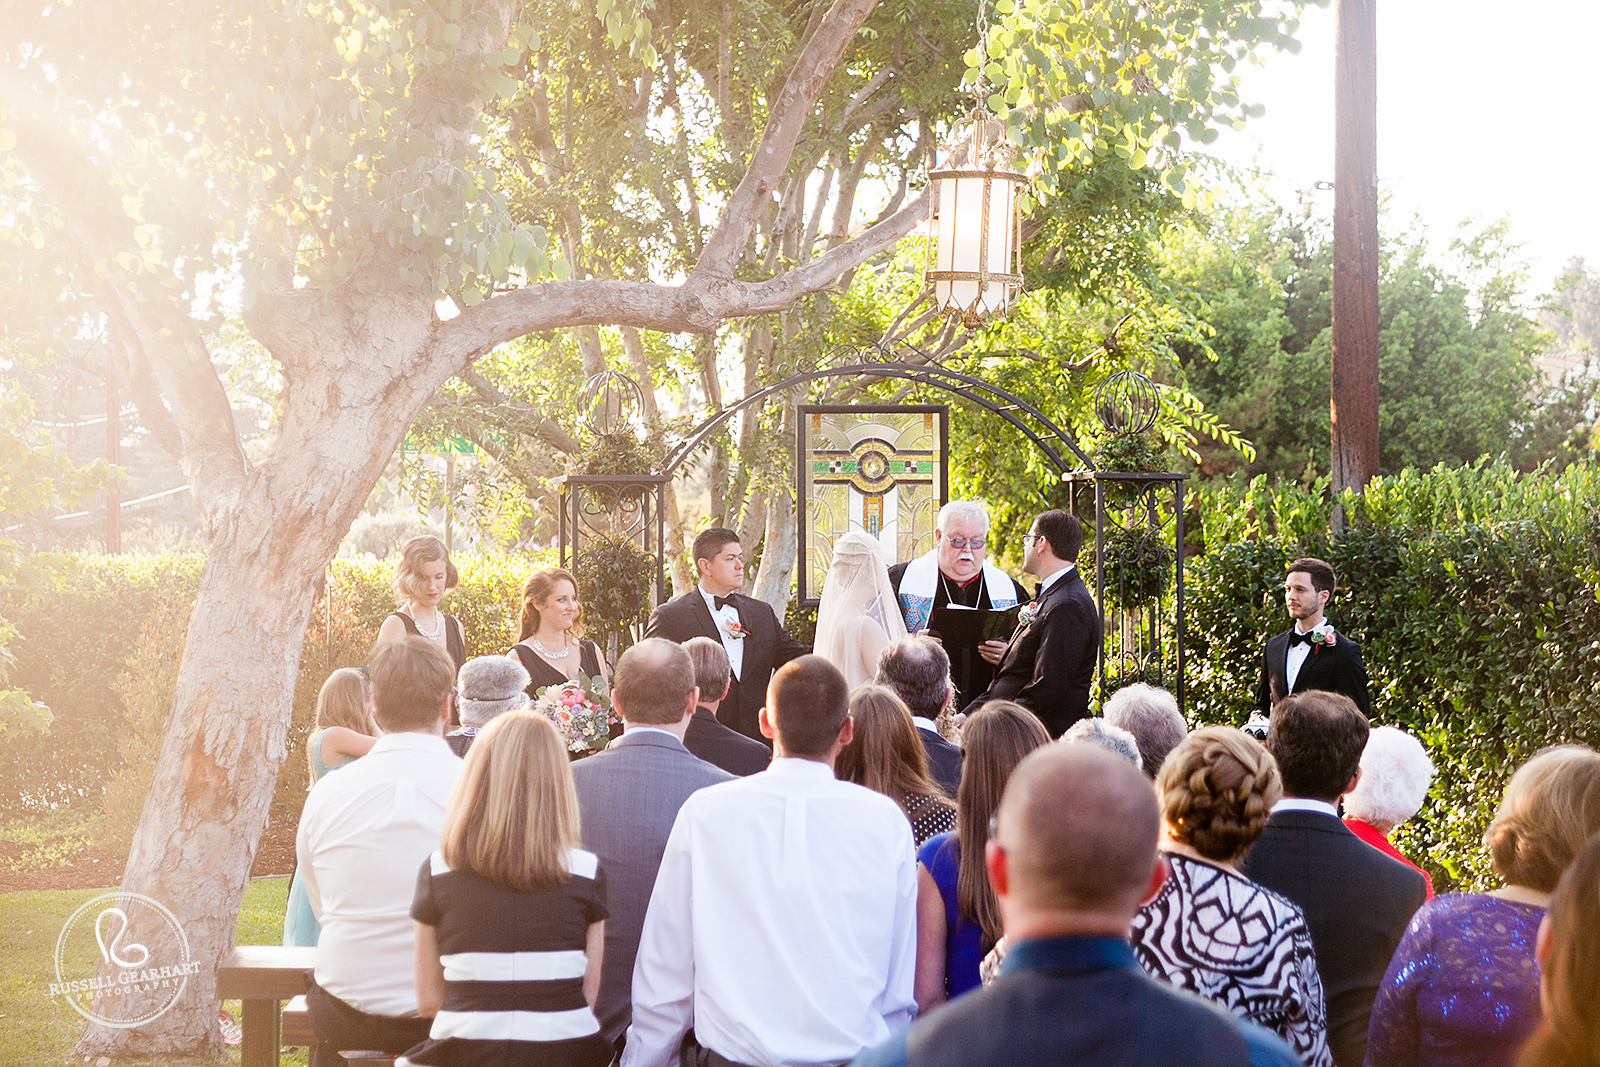 Romantic Sunset Ceremony - Orange County Wedding – Russell Gearhart Photography – www.gearhartphoto.com